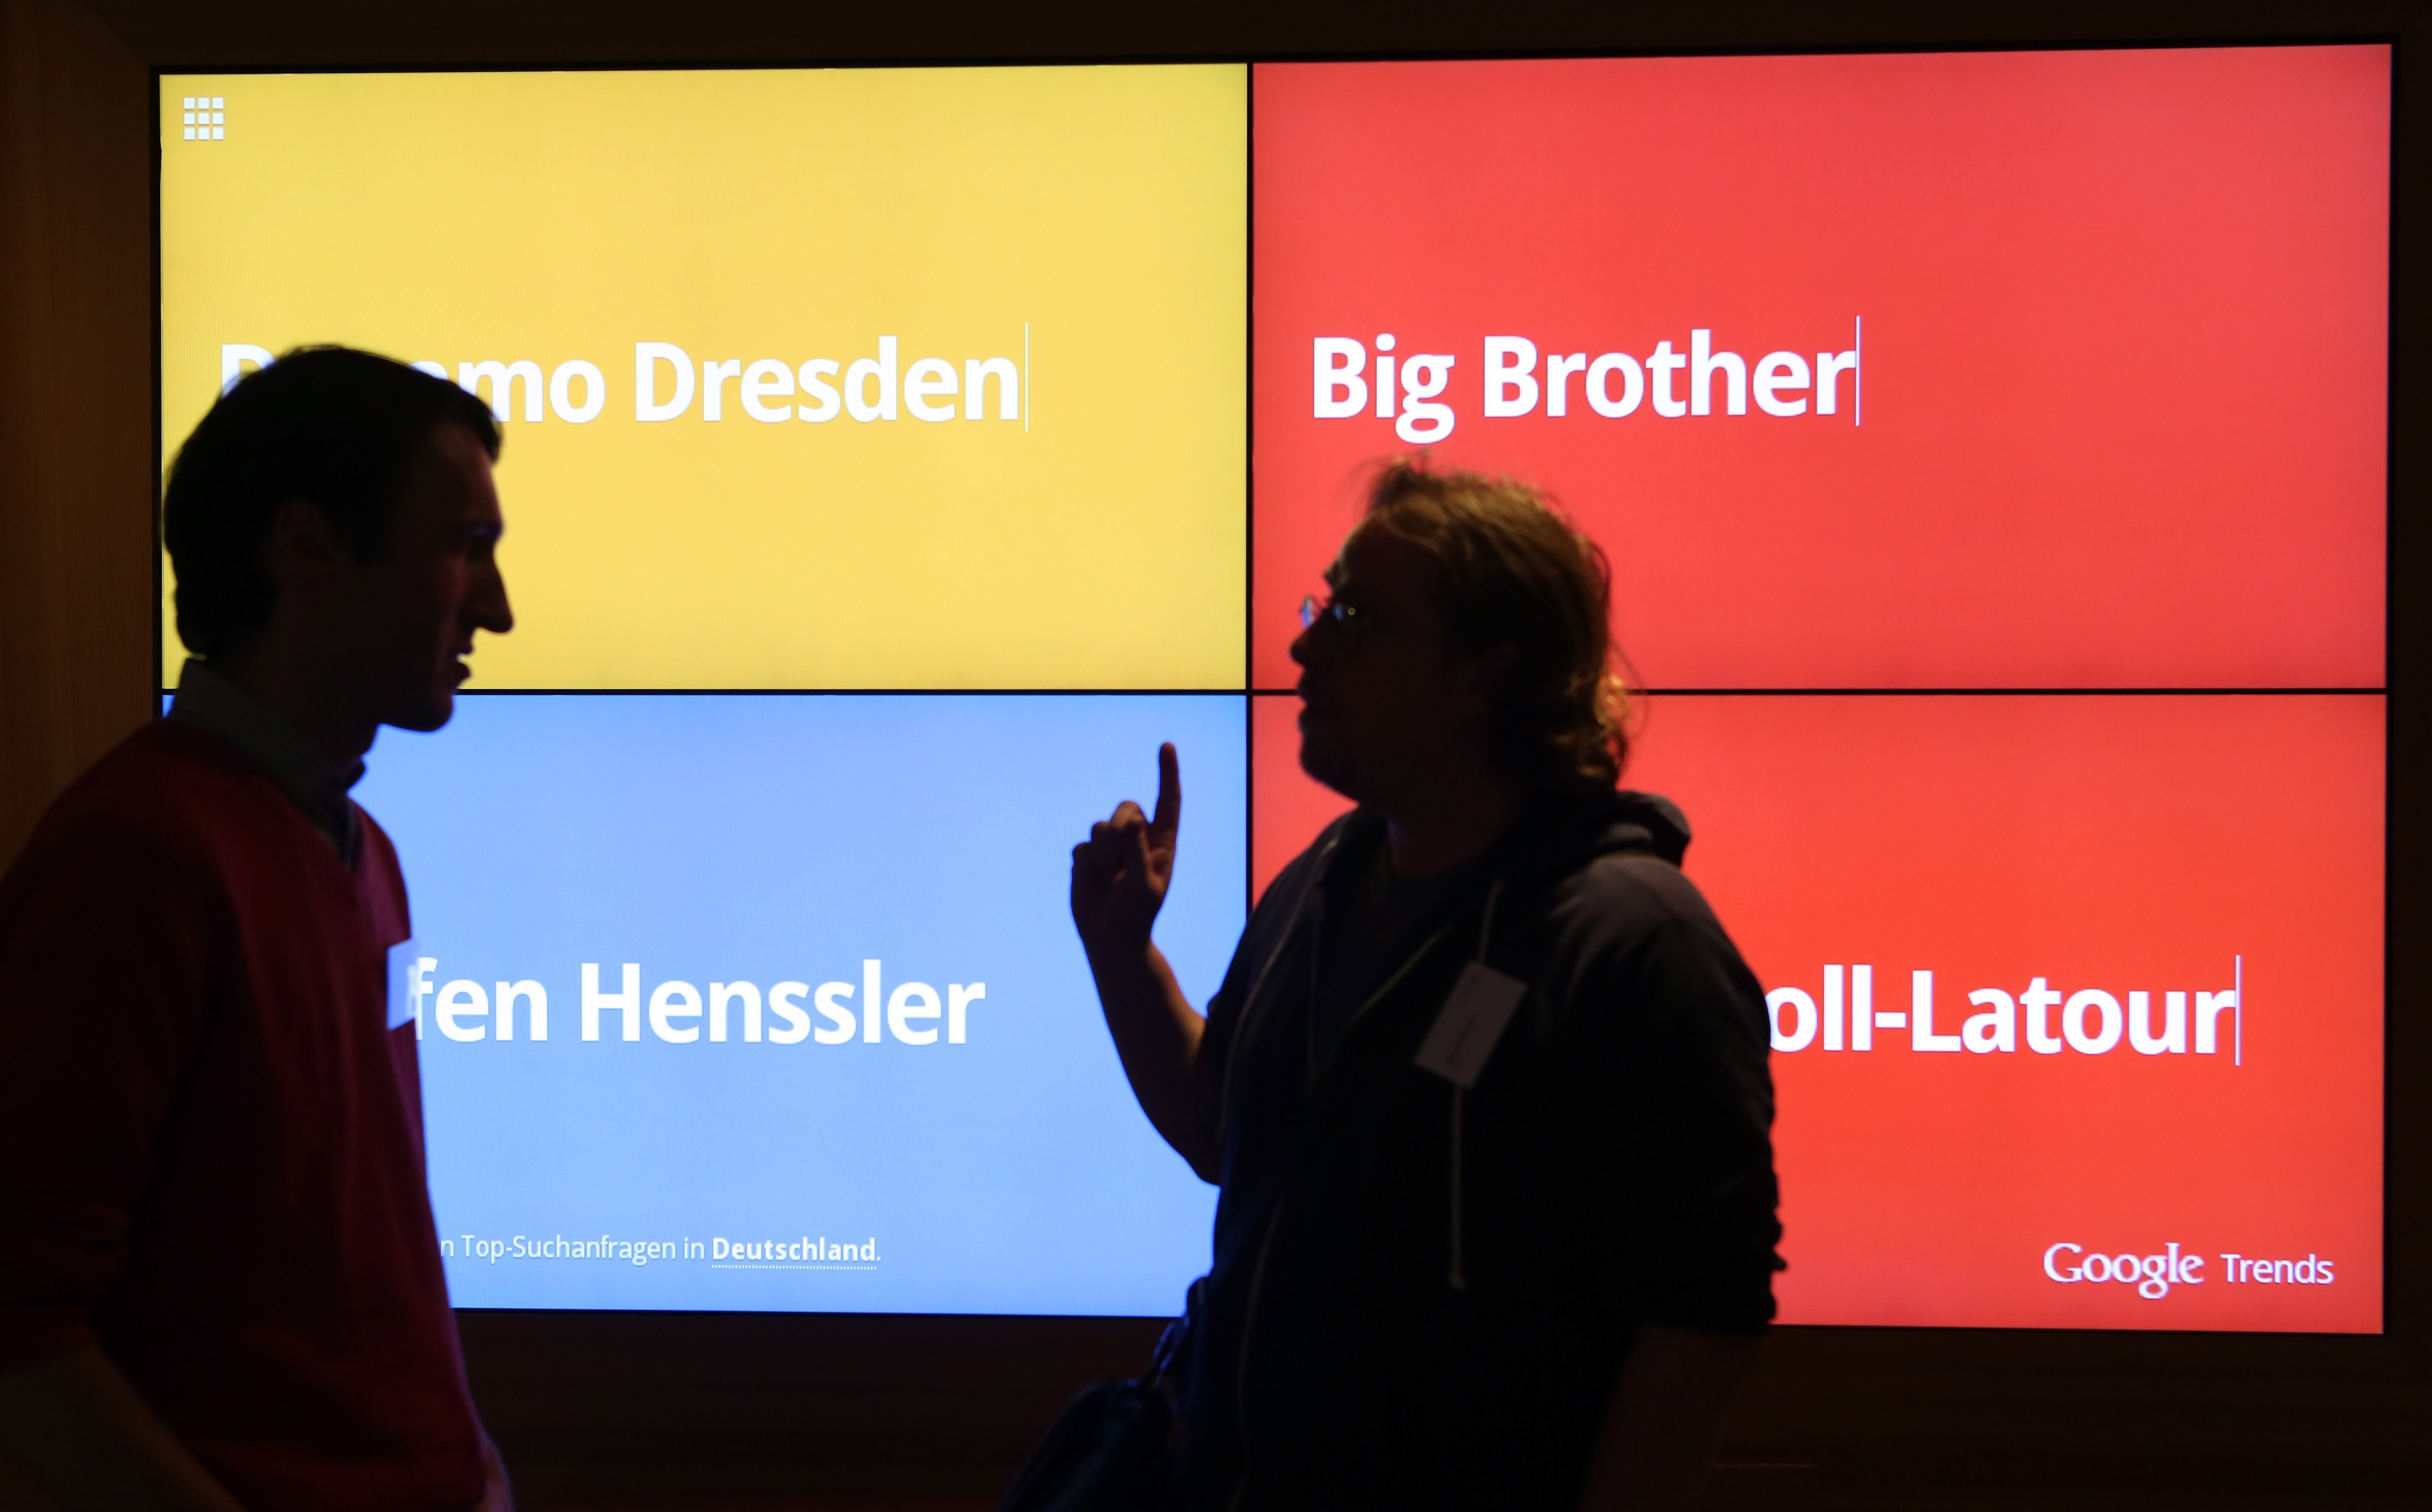 Visitors stand in front of a screen showing the most popular Google searches in Germany at that moment in the company's offices on Aug. 21, 2014 in Berlin. (Adam Berry&mdash;Getty Images)